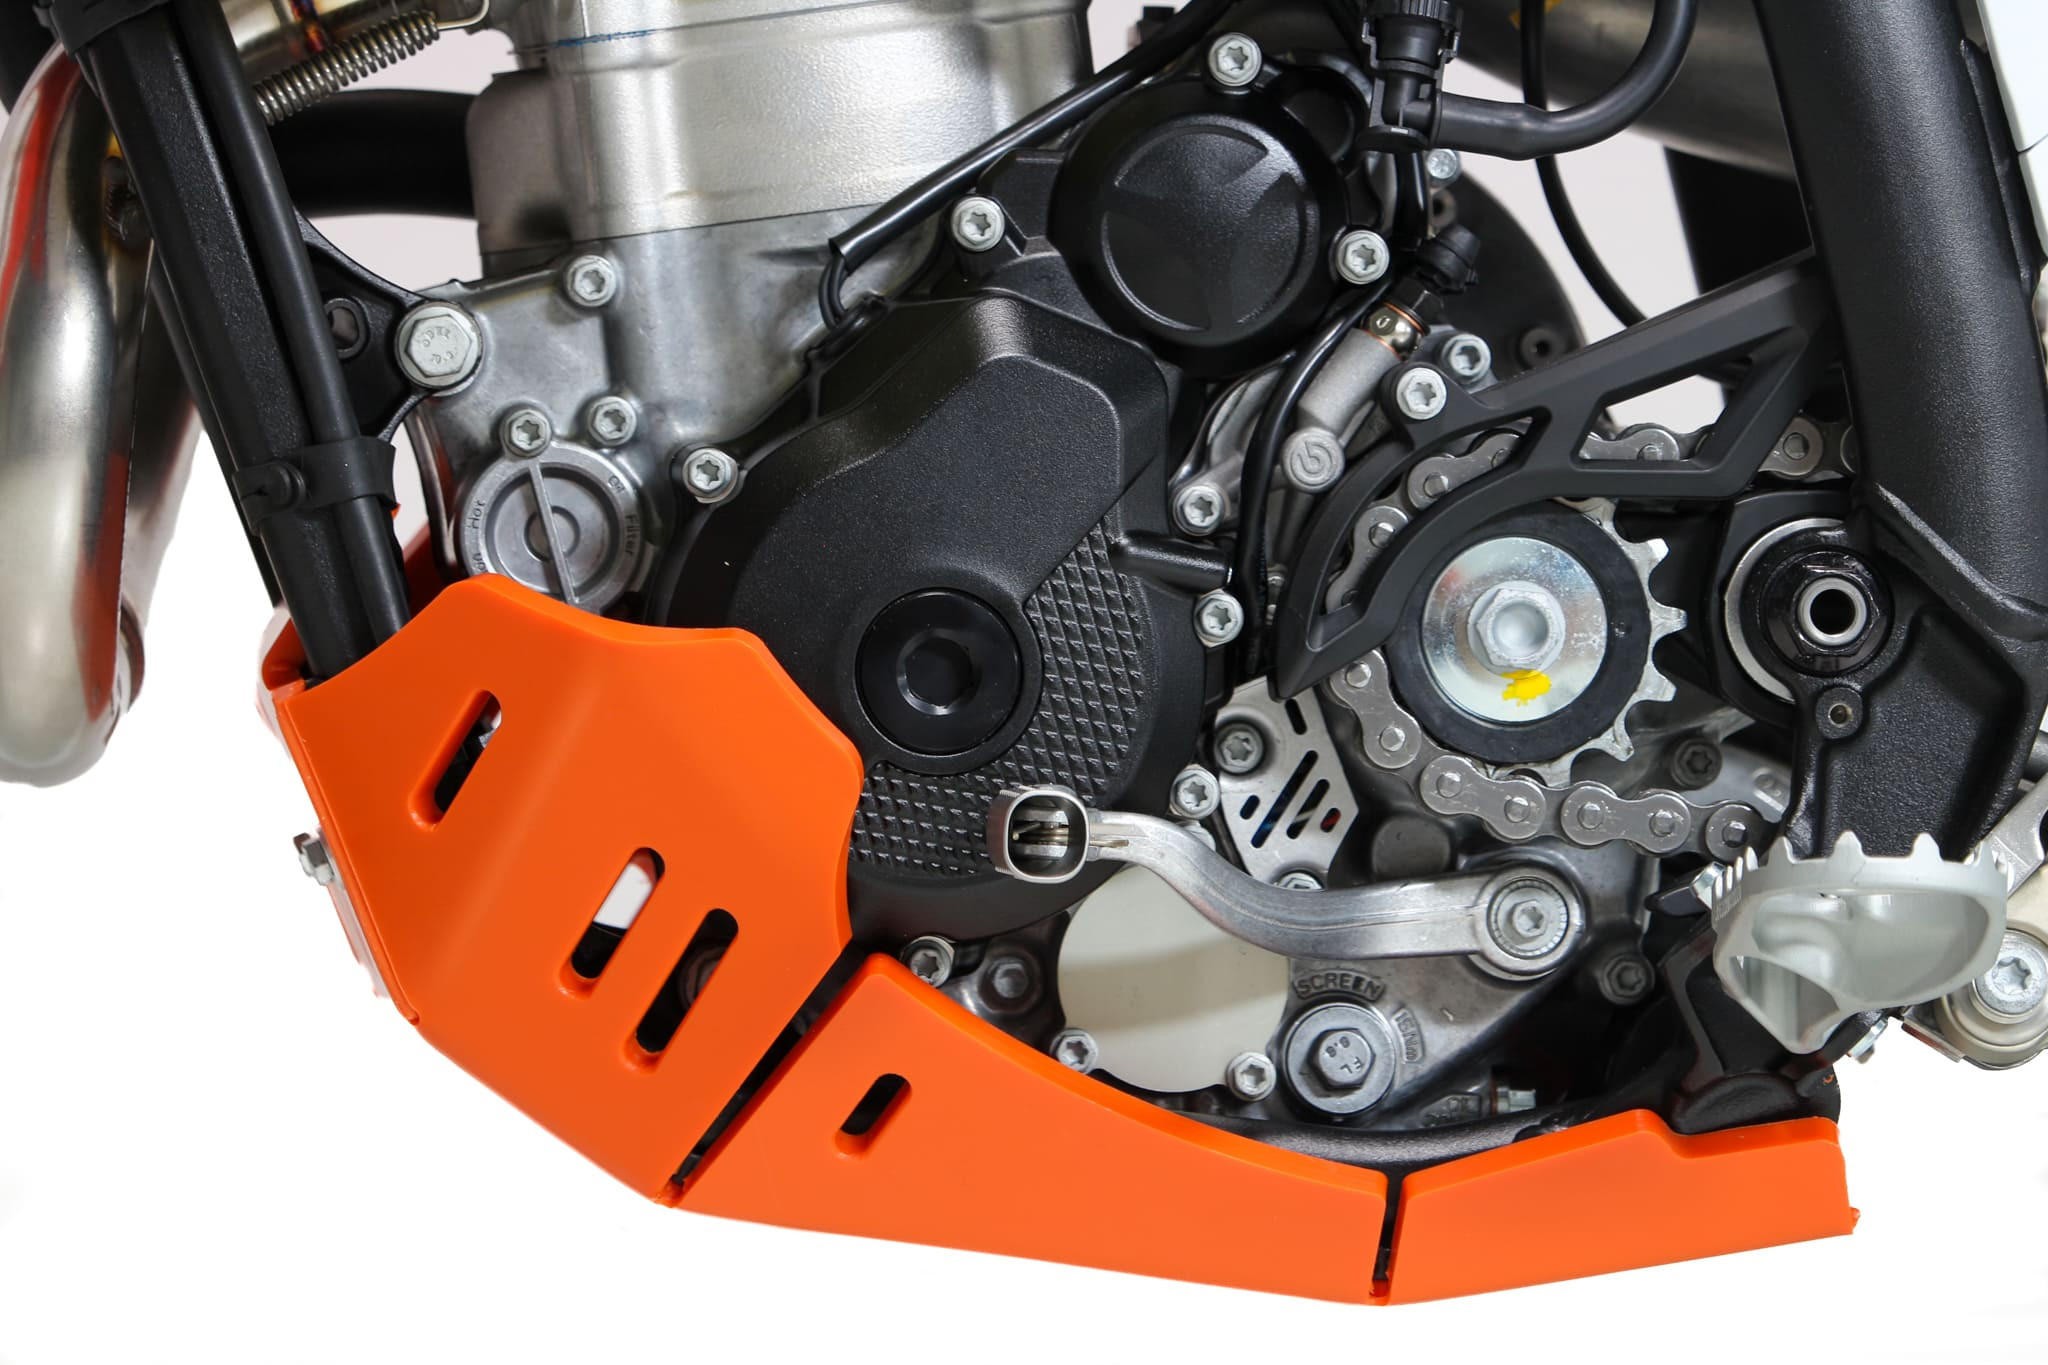 Left side of the orange HDPE plastic skid plate for KTM 250EXCF and 350EXCF